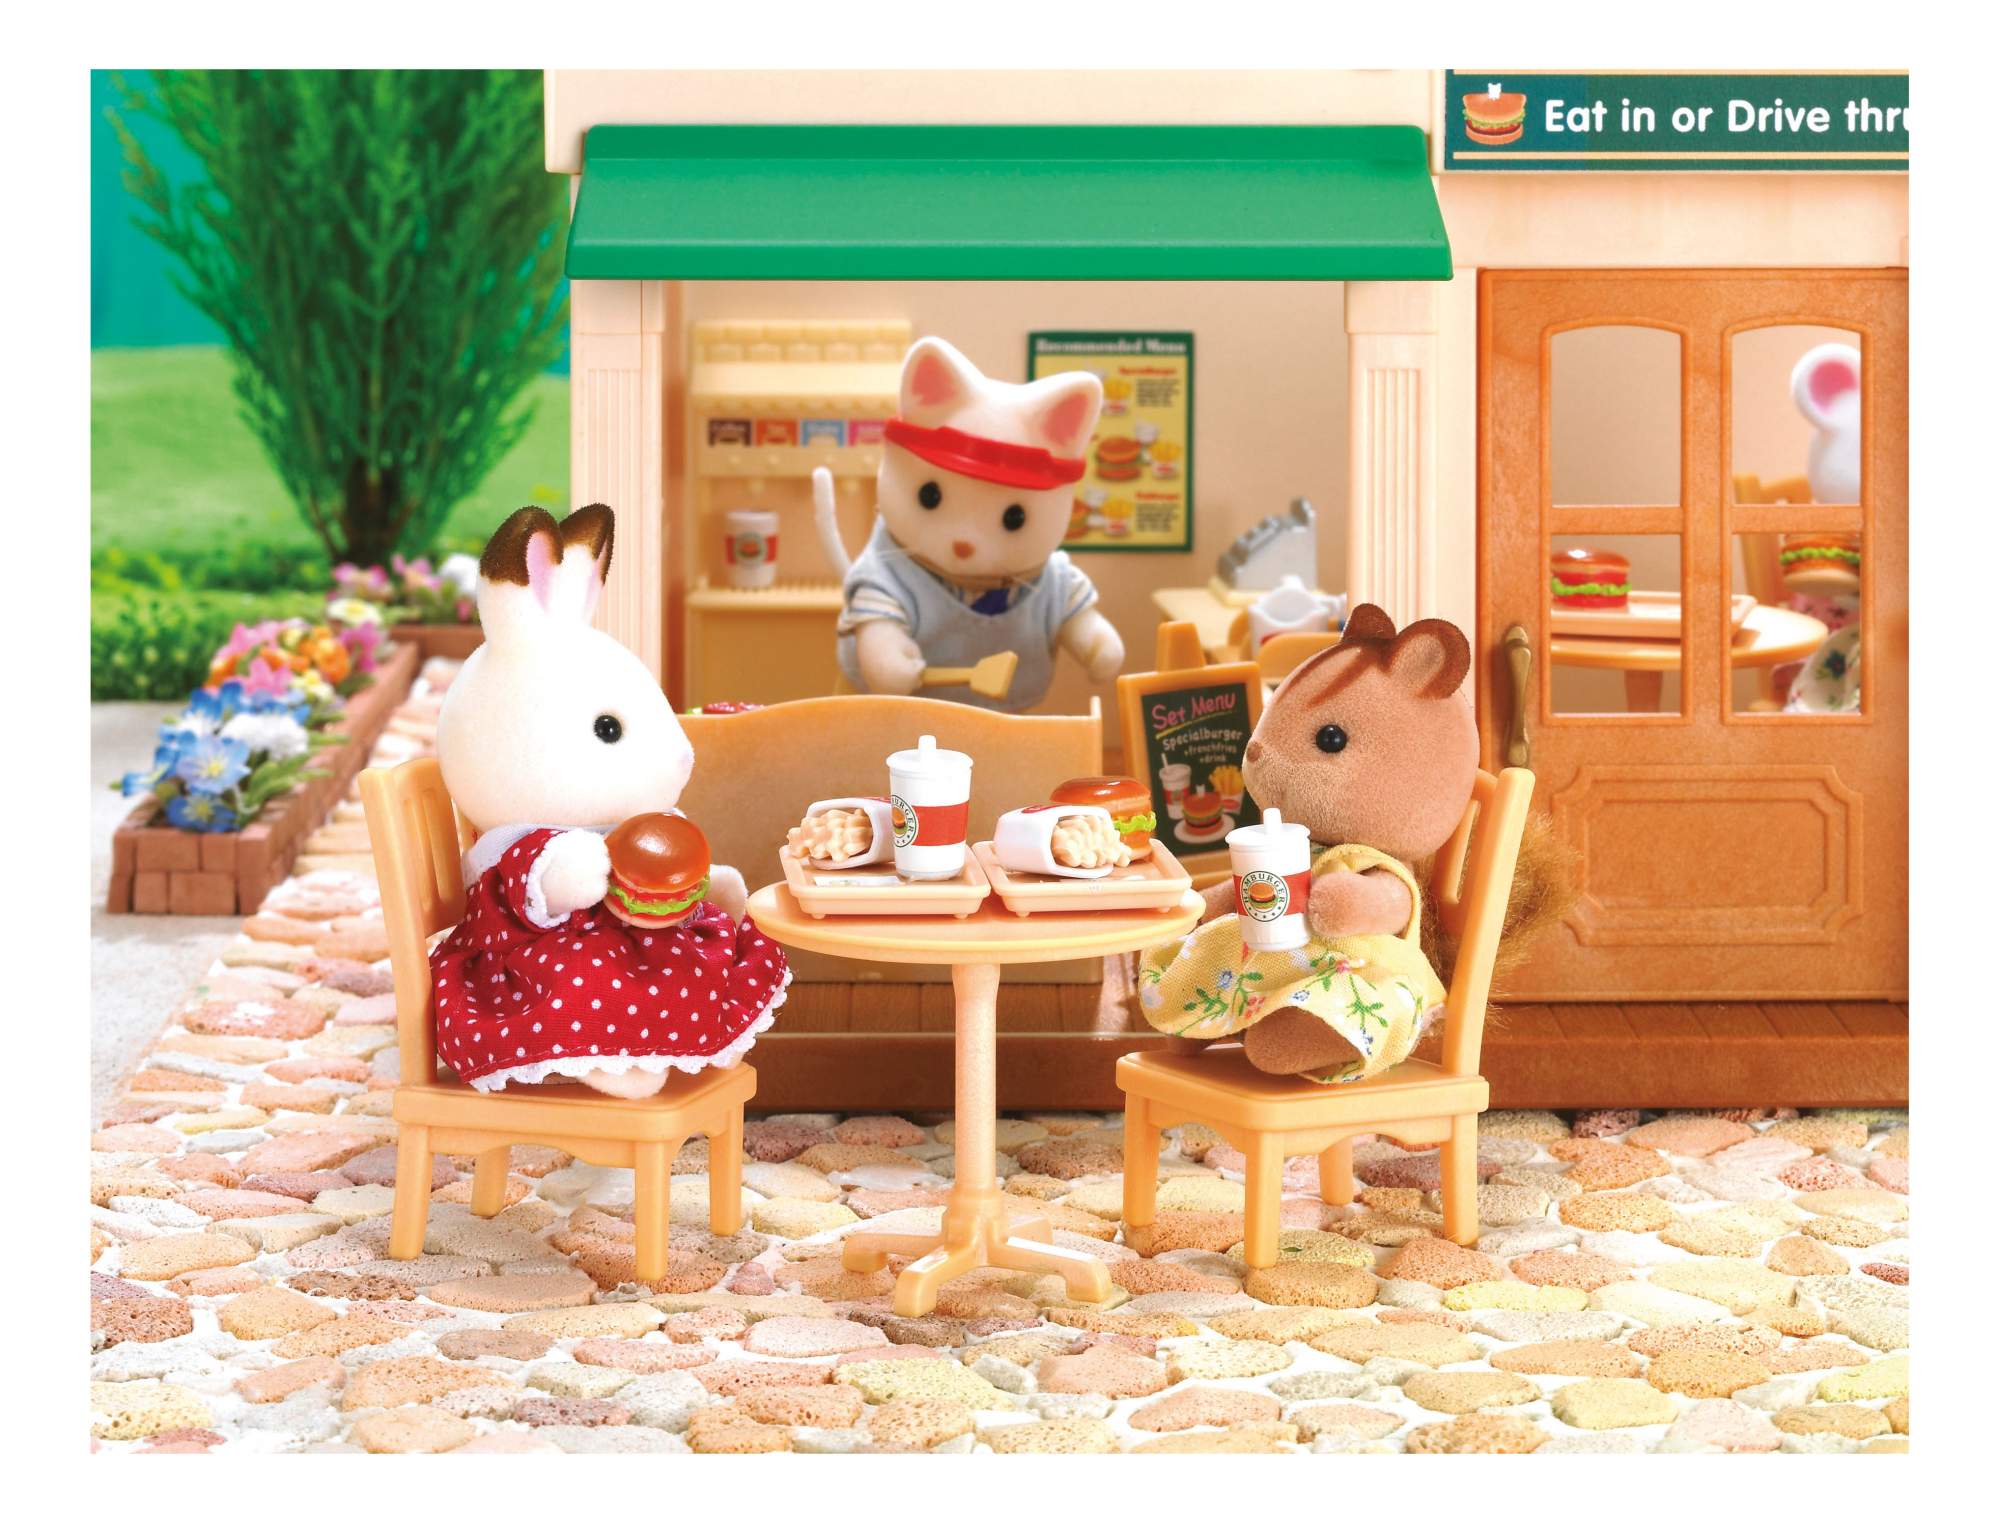 Calico critters burger cafe